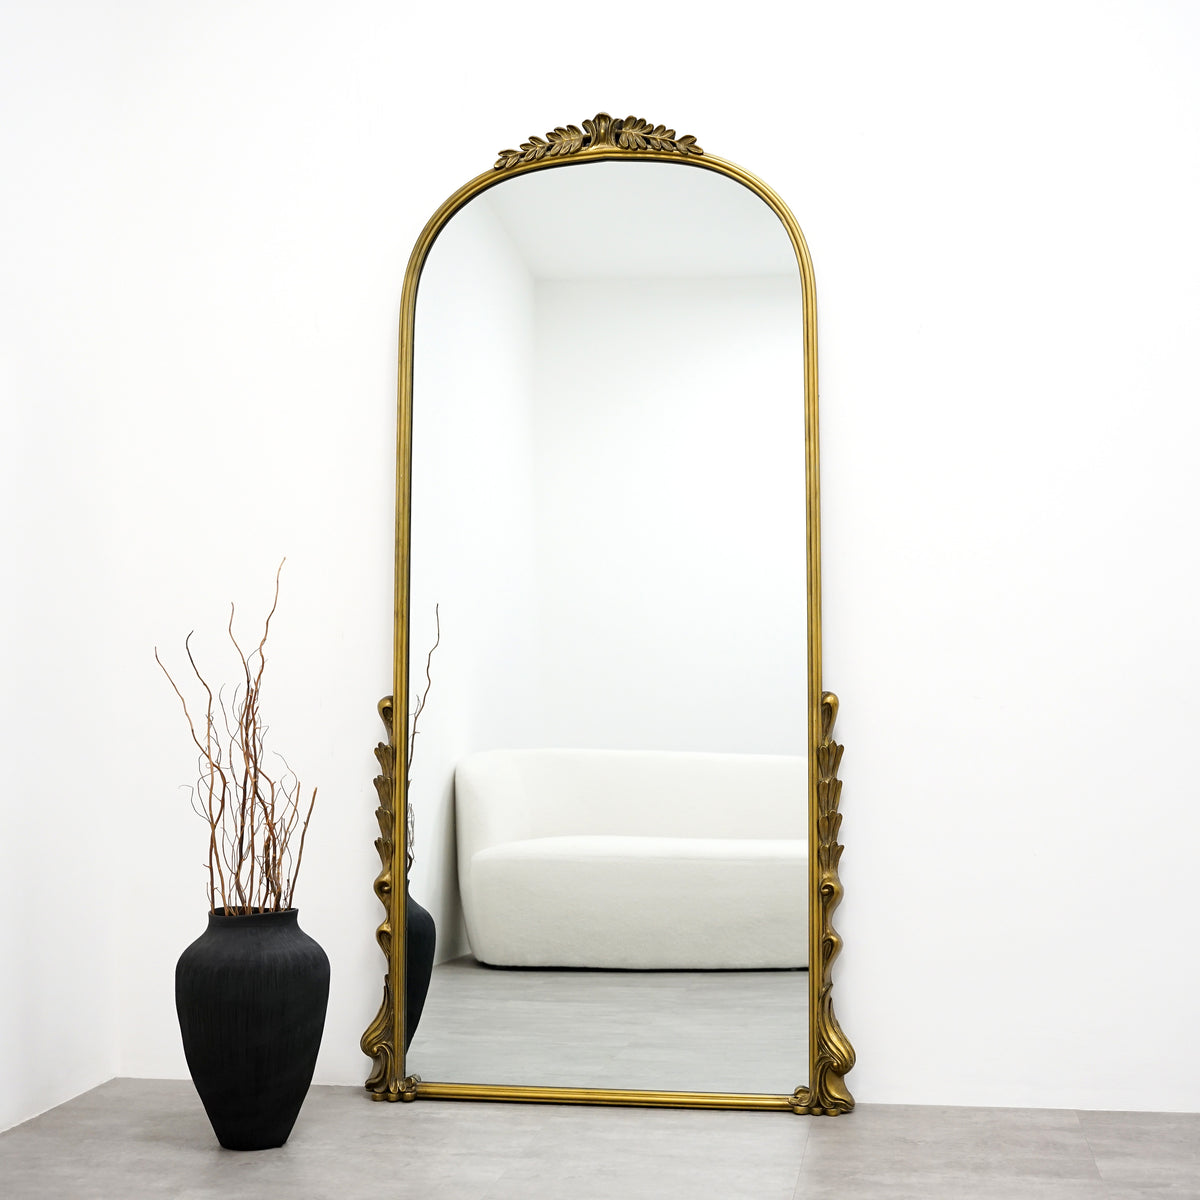 Full Length Gold Arched Ornate Metal Mirror in lounge